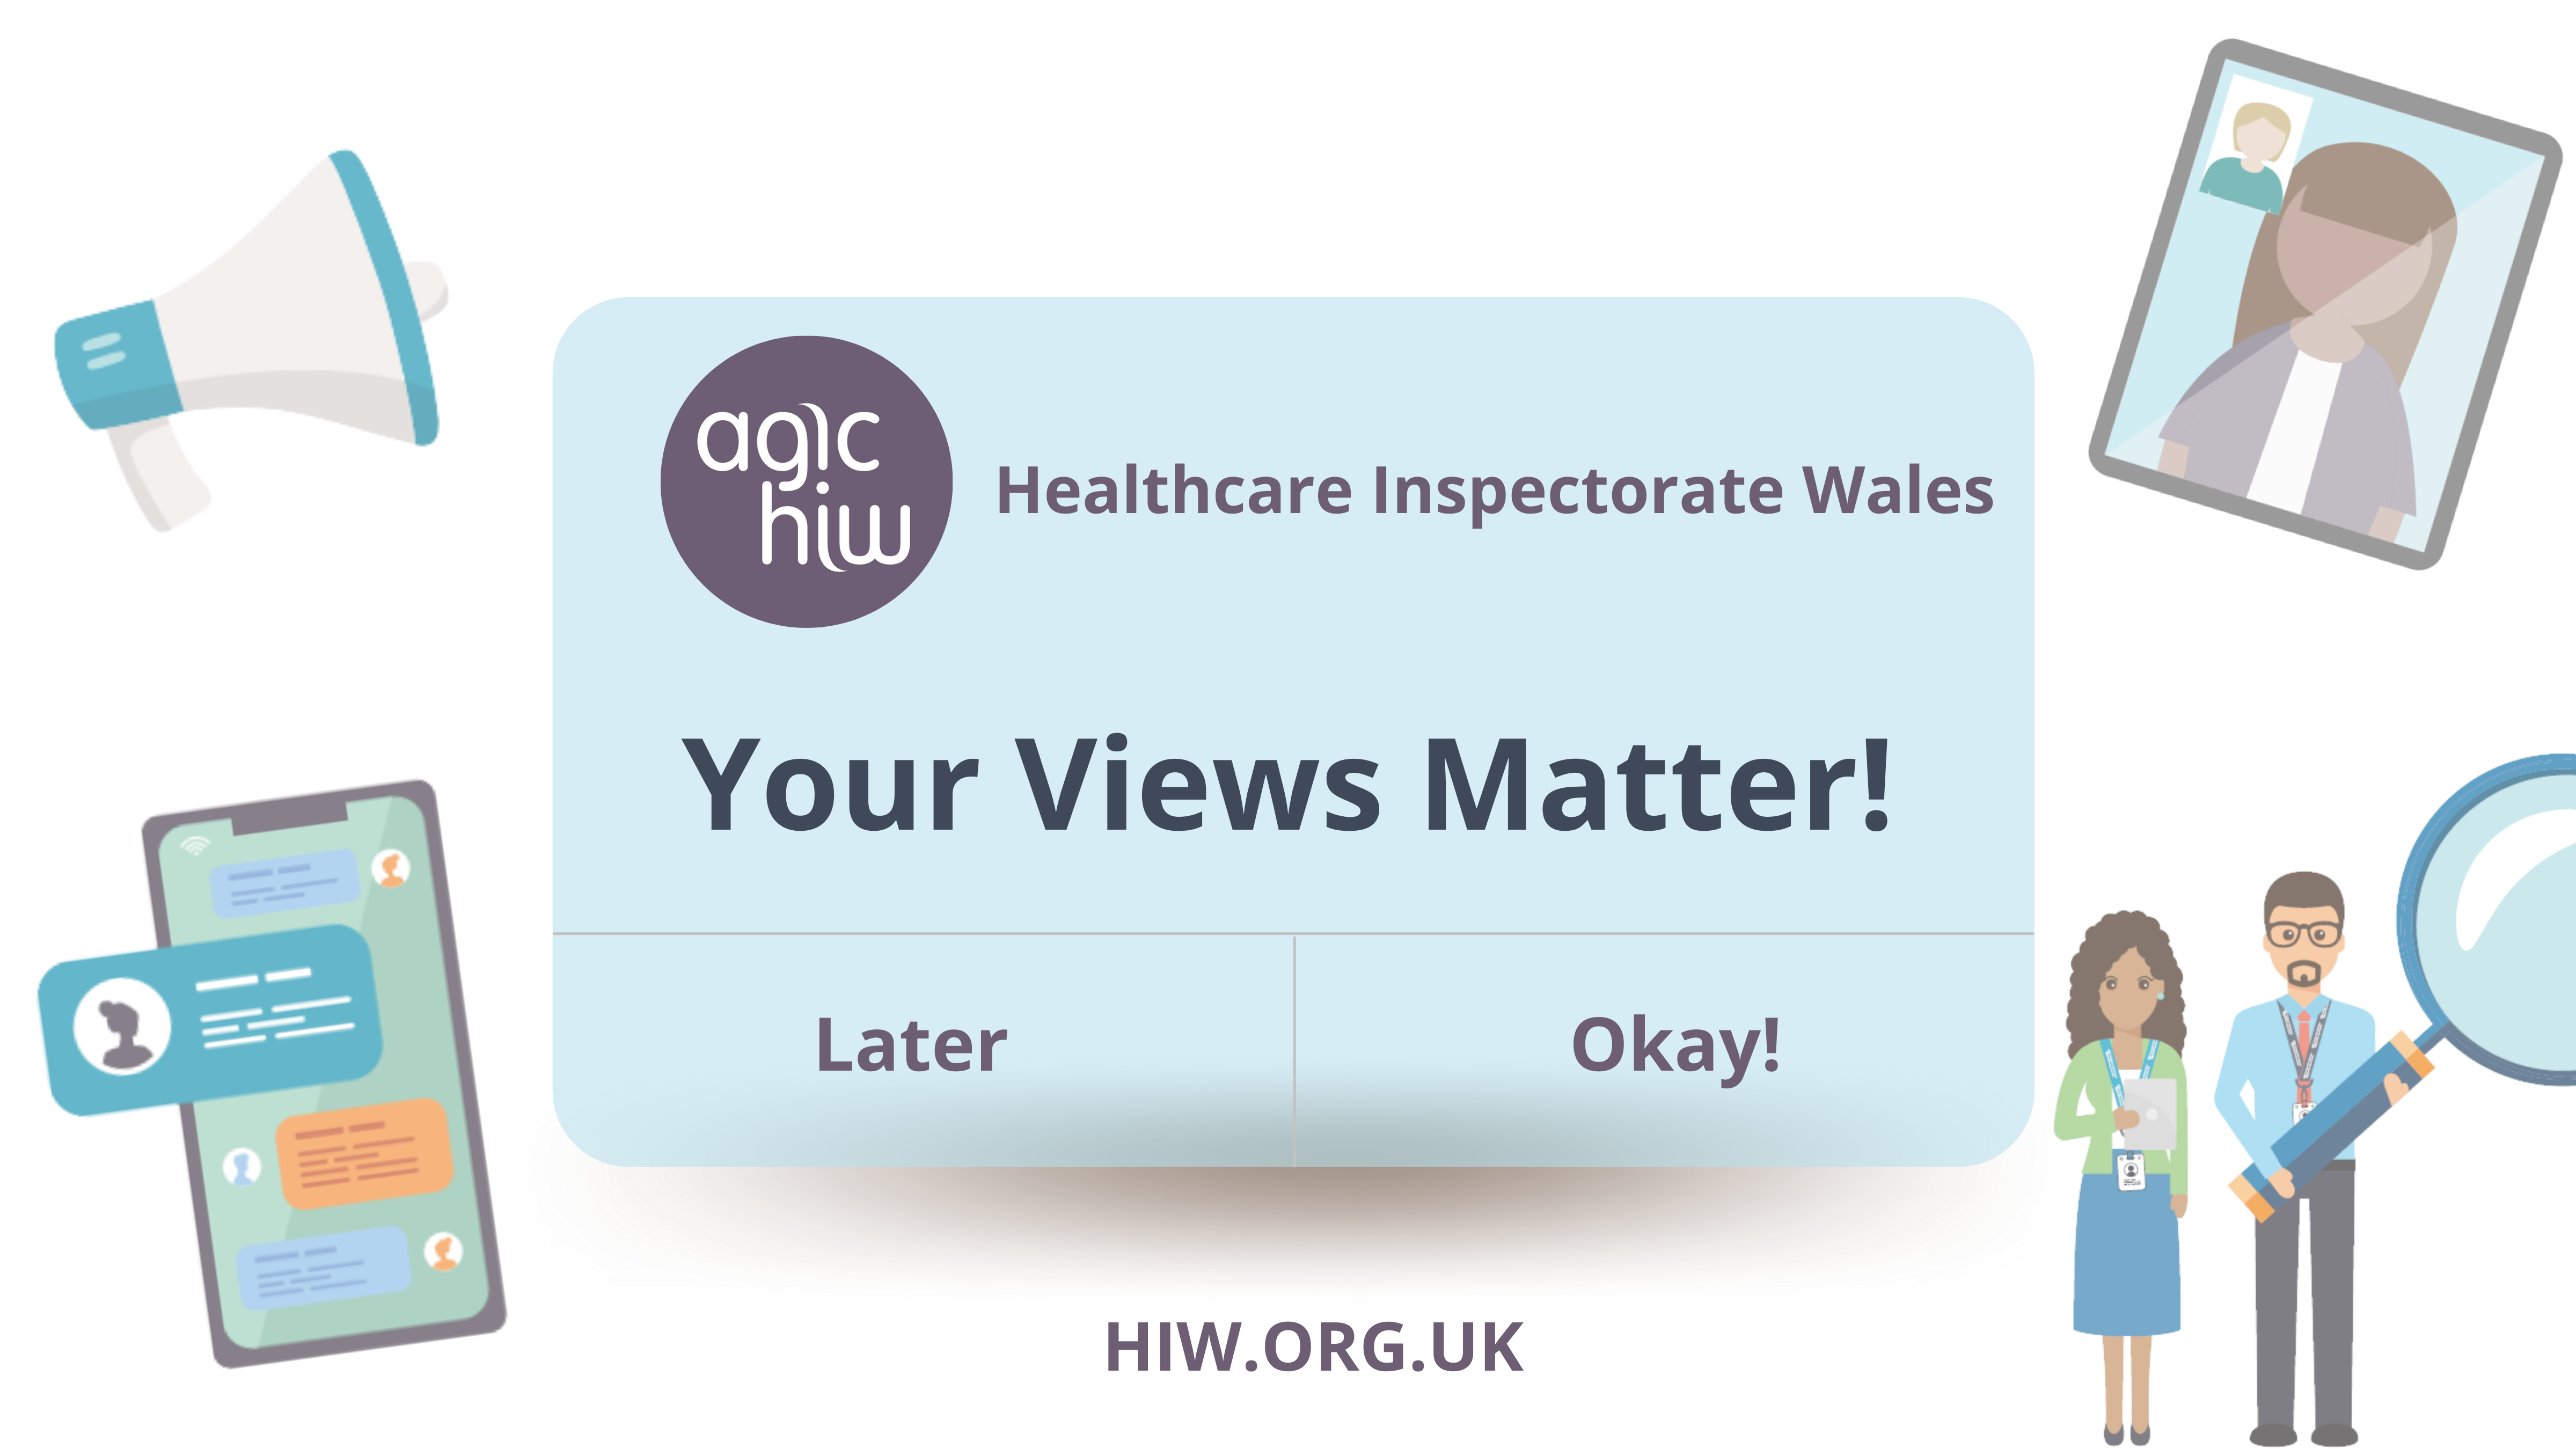 Your views matter! surrounded by icons of mobile phone, inspectors, speakerphone and iPad